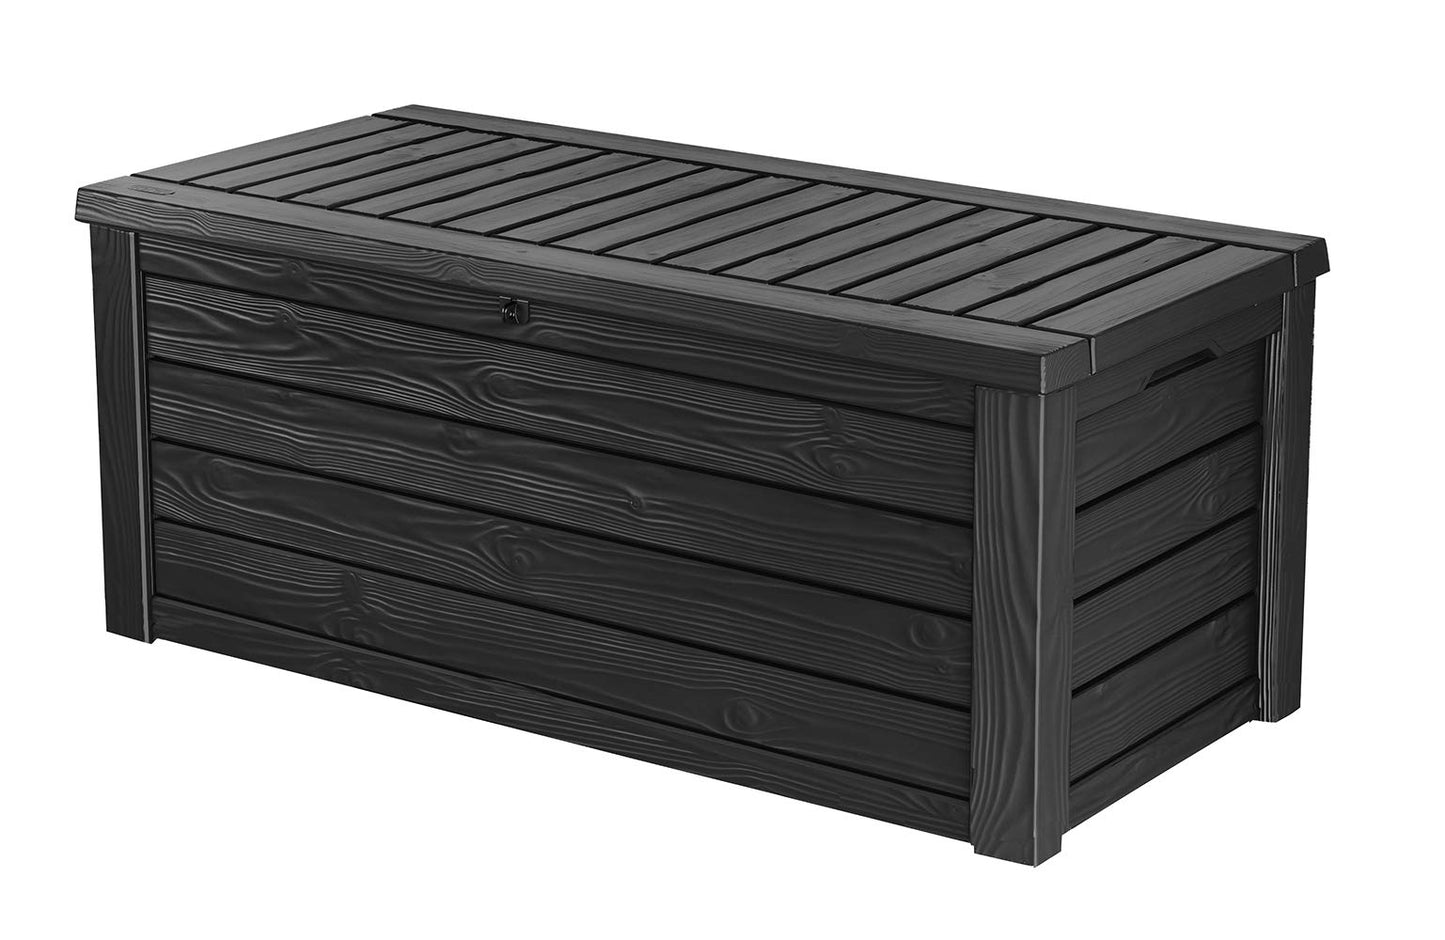 Keter Westwood 150 Gallon Resin Large Deck Box-Organization and Storage, Dark Grey & Solana 70 Gallon Storage Bench Deck Box for Patio Furniture, Front Porch Decor and Outdoor Seating, Grey